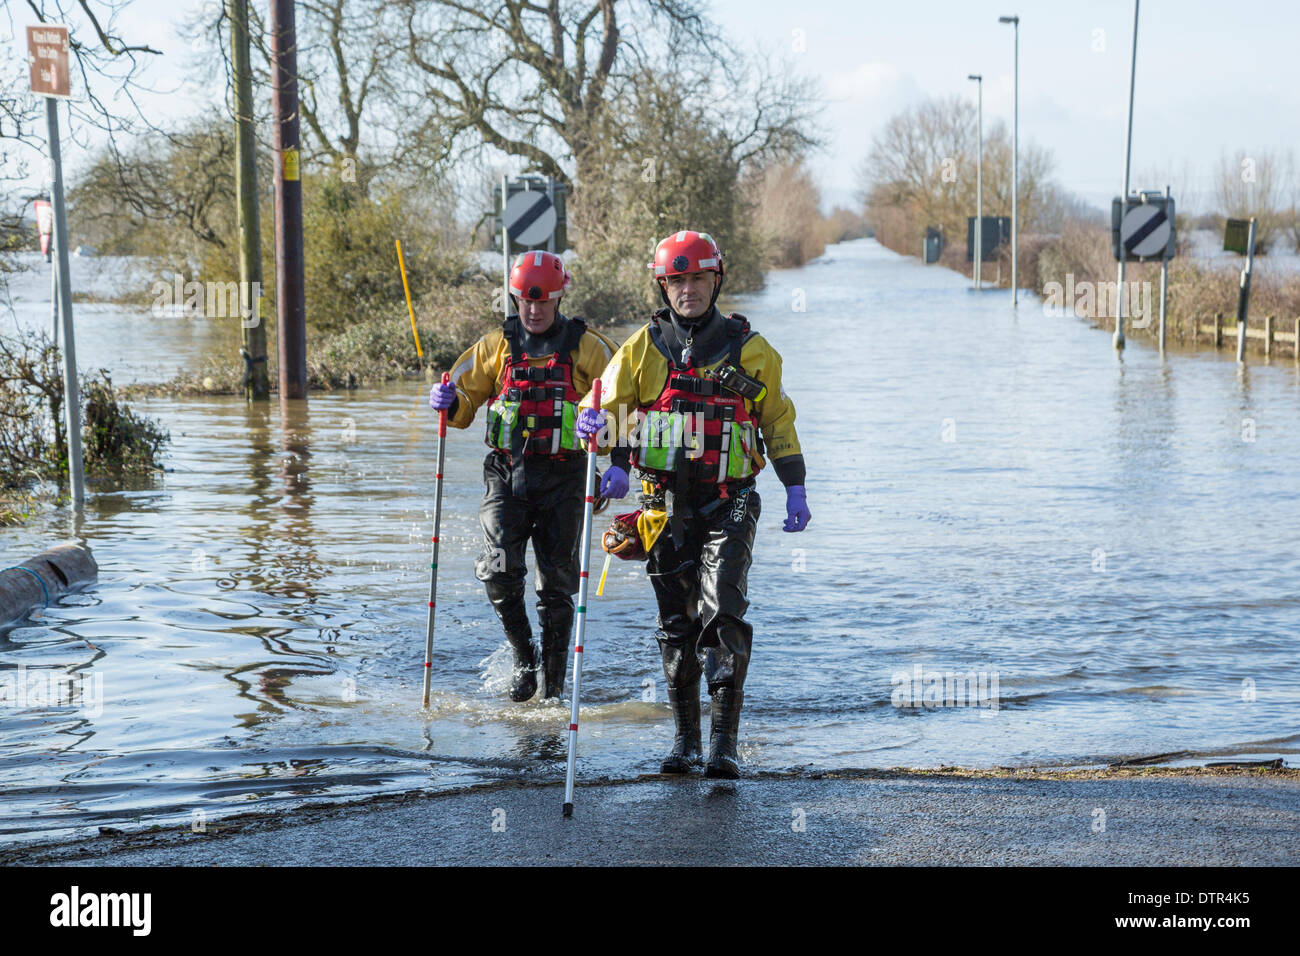 Burrowbridge, UK. 22nd Feb, 2014. Officers from Somerset's Fire & Rescue service wade into floodwater at Burrowbridge on February 22, 2014. Dressed in waders and lifejackets, two men walk along the carriageway of the A361, now totally submerged by floodwater during the heaviest flooding in living history on the Somerset Levels. They are using measuring sticks to determine the current depth of water along the carriage which currently stands at 1.1 metres at this crossroad. Credit:  Nick Cable/Alamy Live News Stock Photo